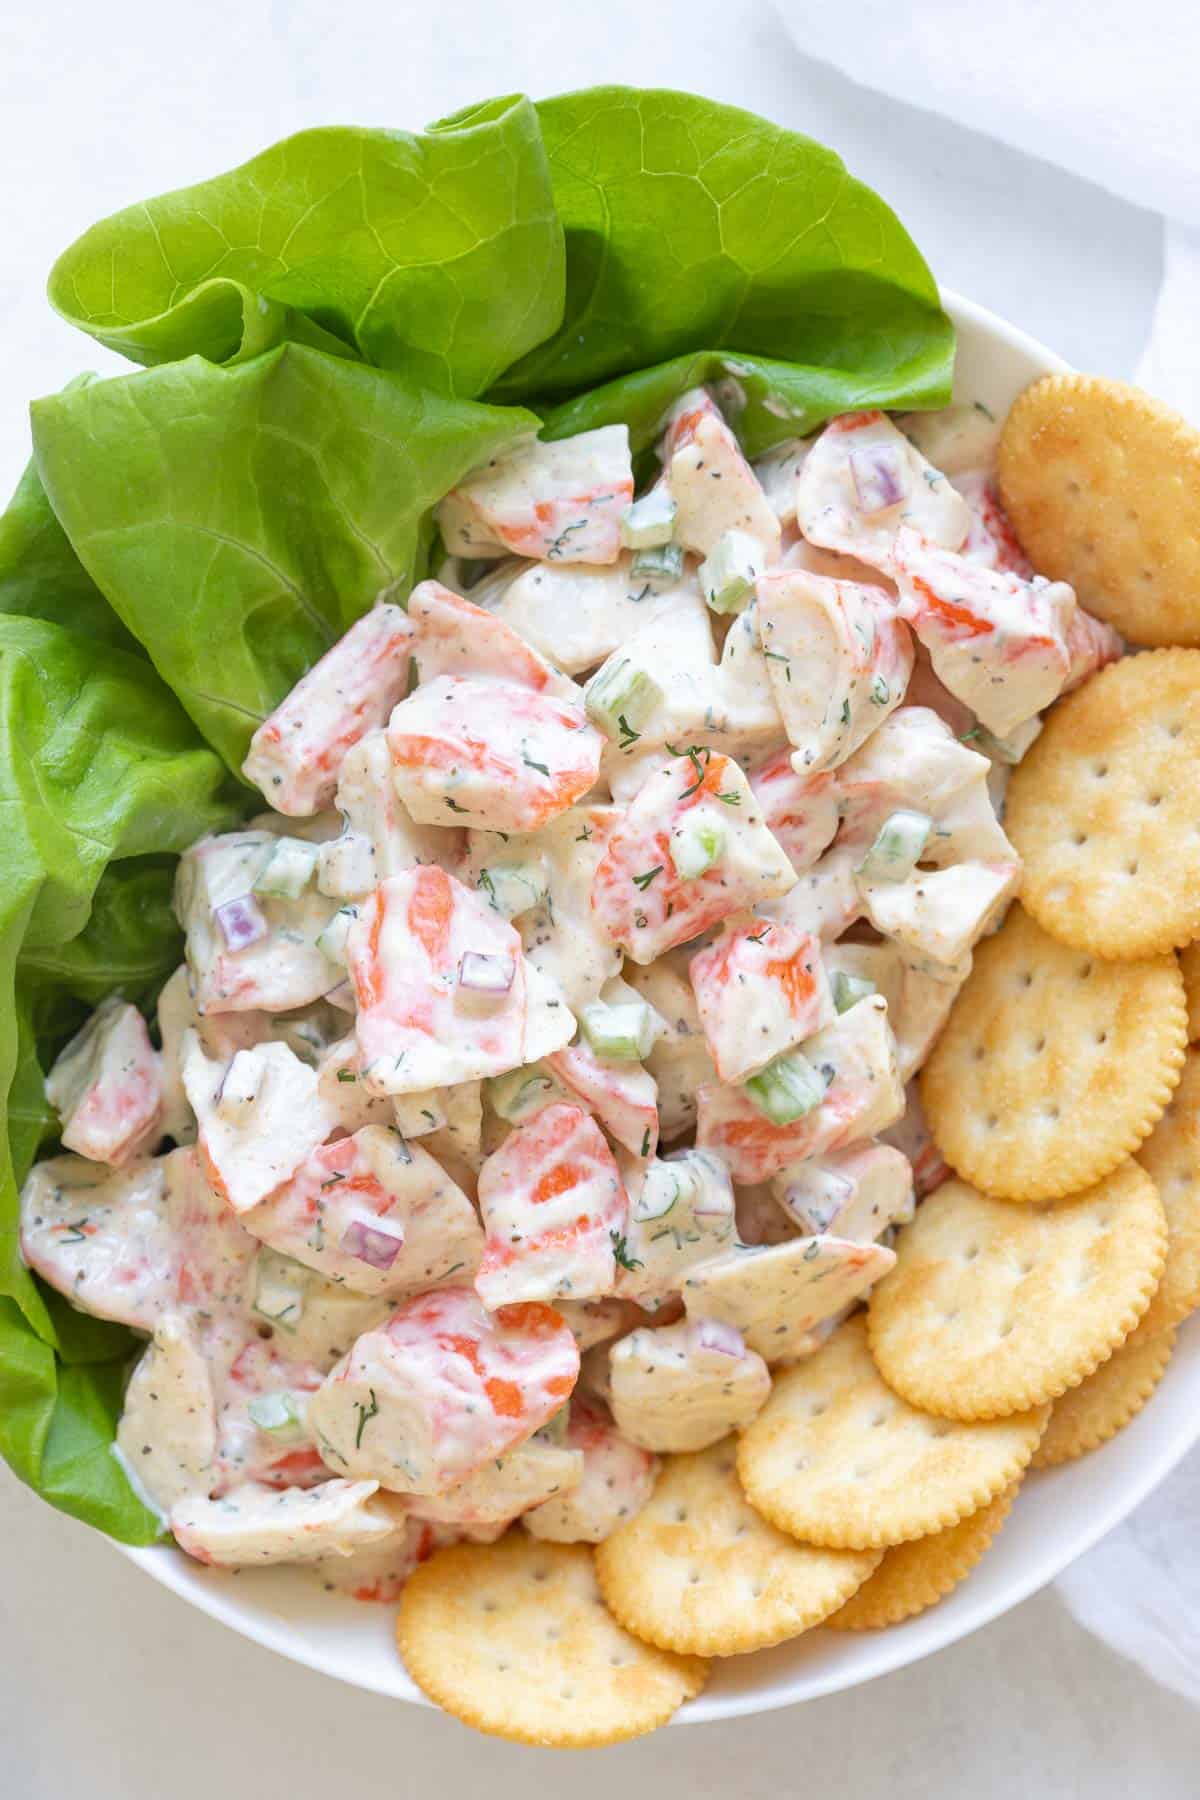 Overhead closeup view of imitation crab salad in a bowl with lettuce and crackers.